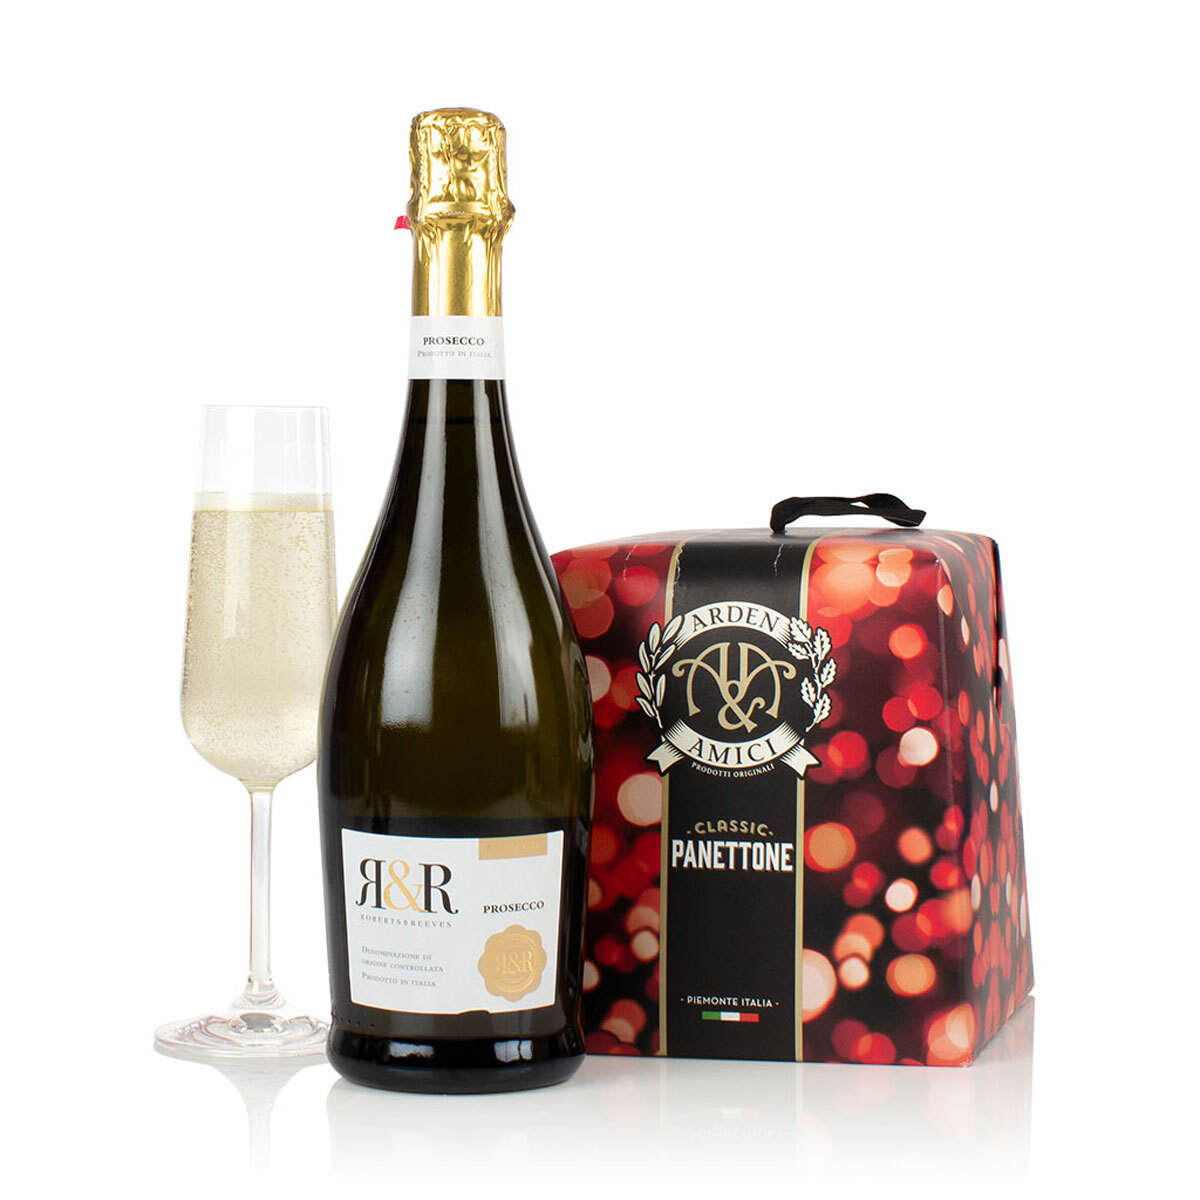 Bottle of Prosecco with Panettone